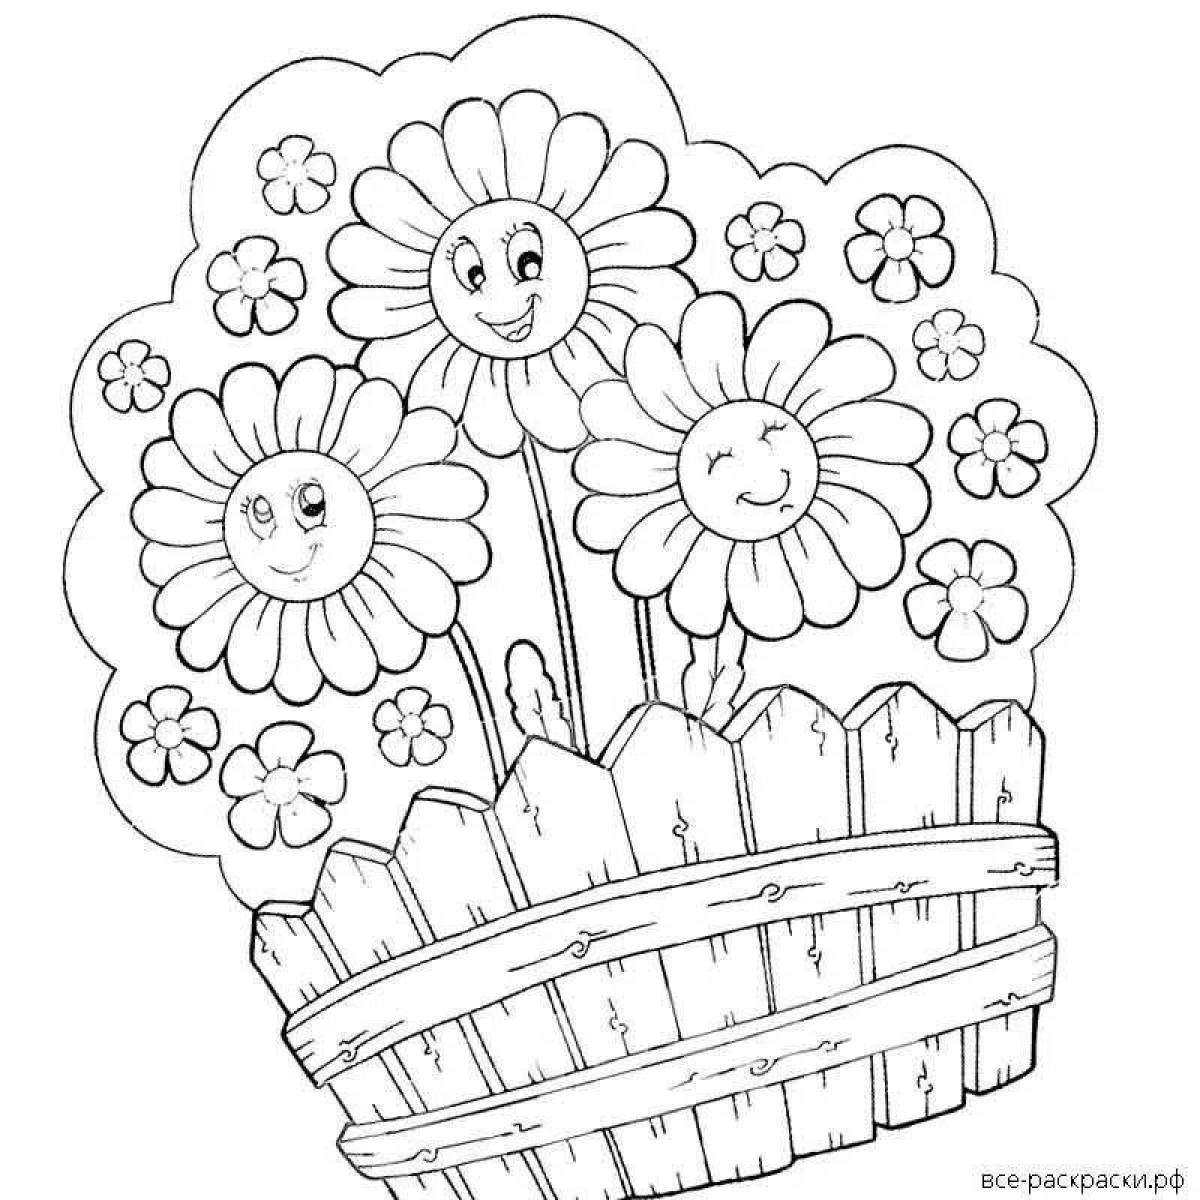 Coloring book luxury bouquet of daisies